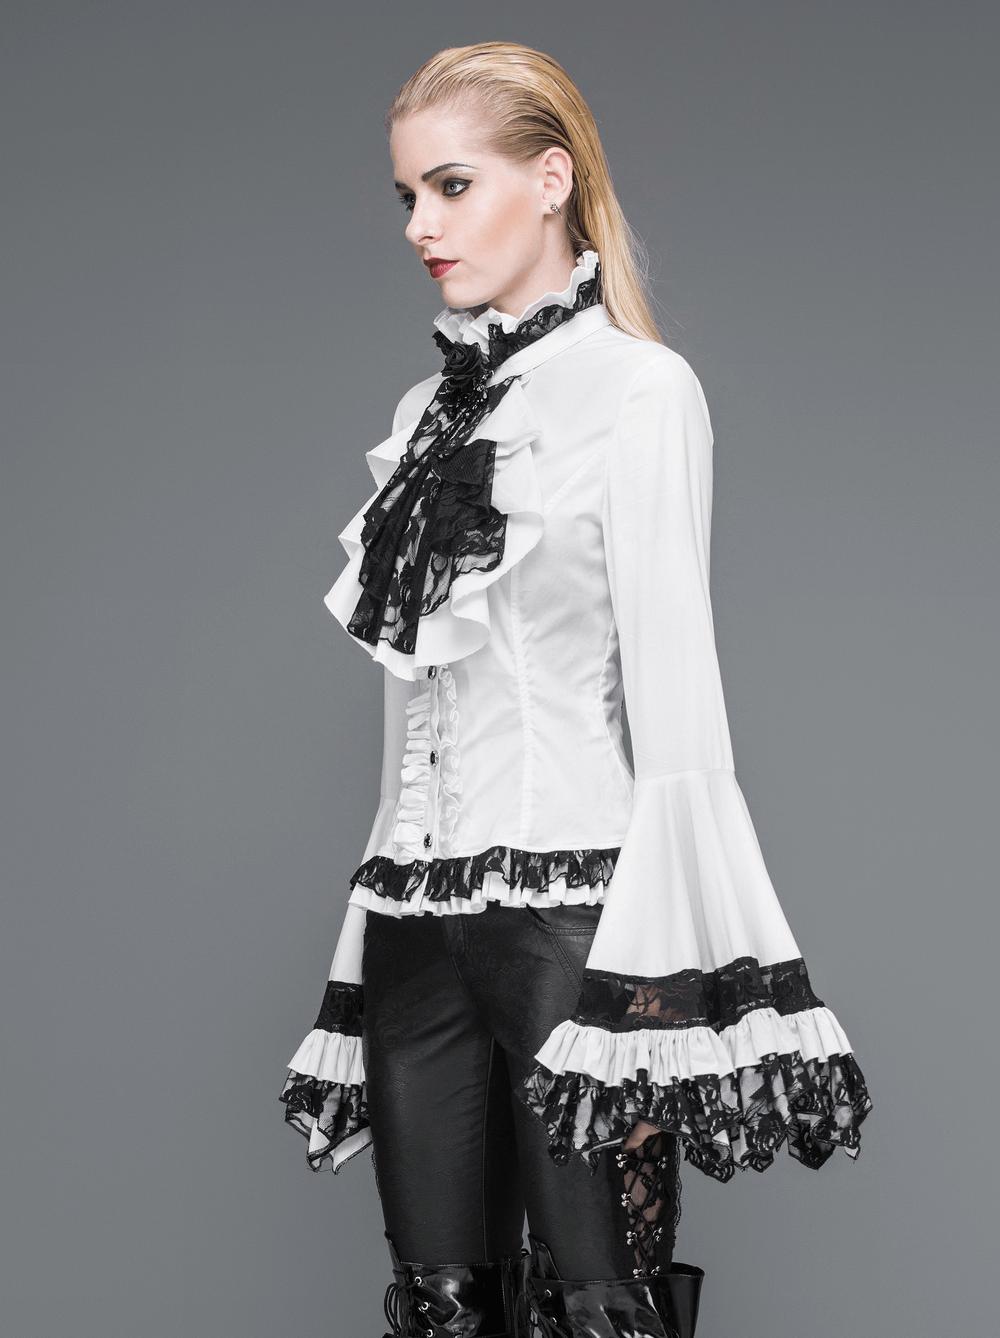 Victorian Gothic Lace Ruffle Blouse with Black Tie Neck - HARD'N'HEAVY